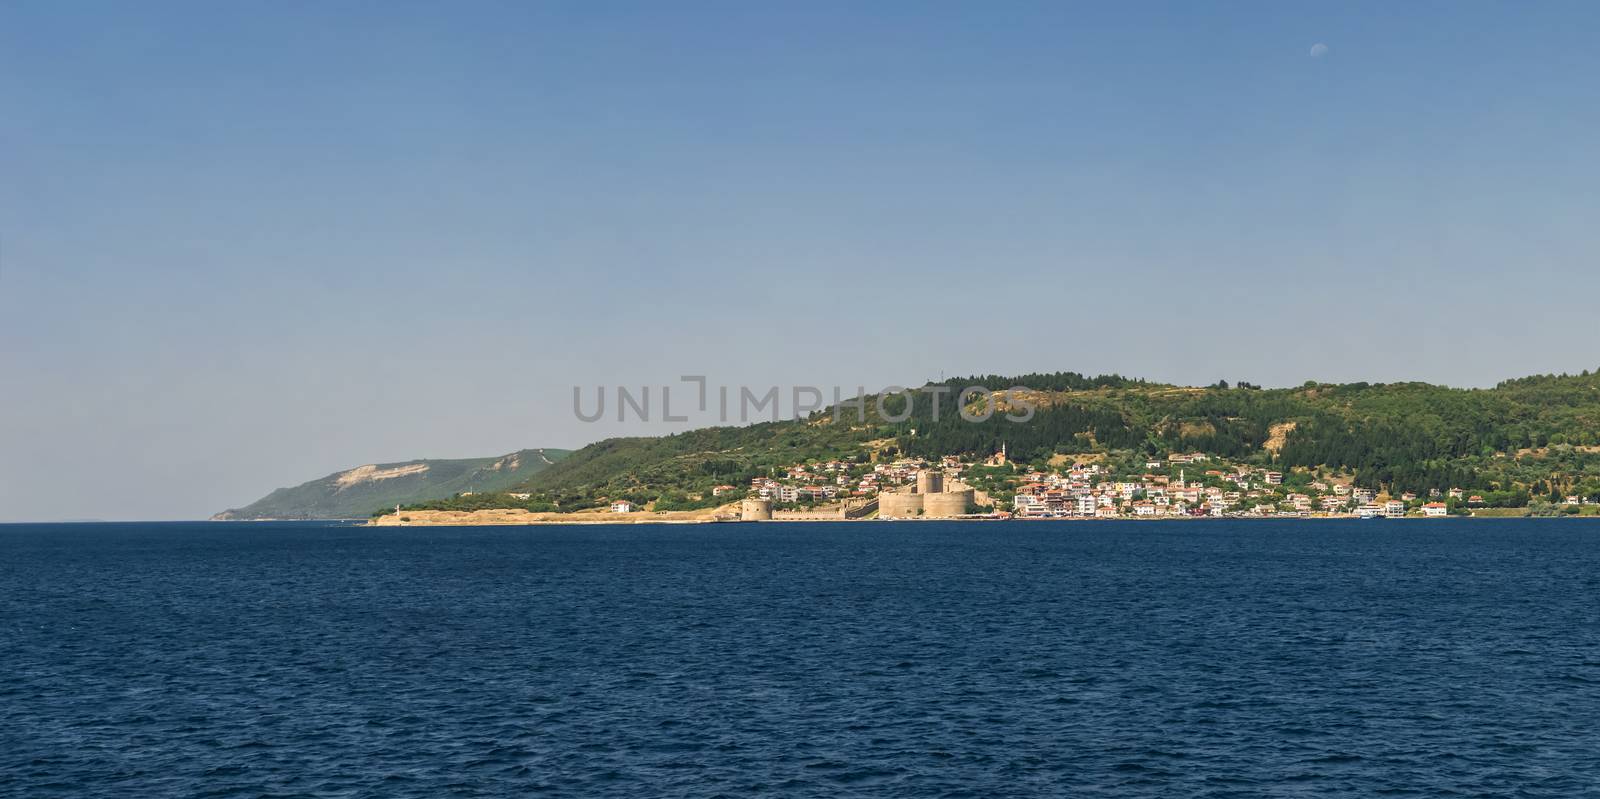 Canakkale, Turkey - 07.23.2019.  Kilitbahir castle and fortress on the west side of the Dardanelles opposite city of Canakkale in Turkey. Big size panoramic view on a sunny summer morning.